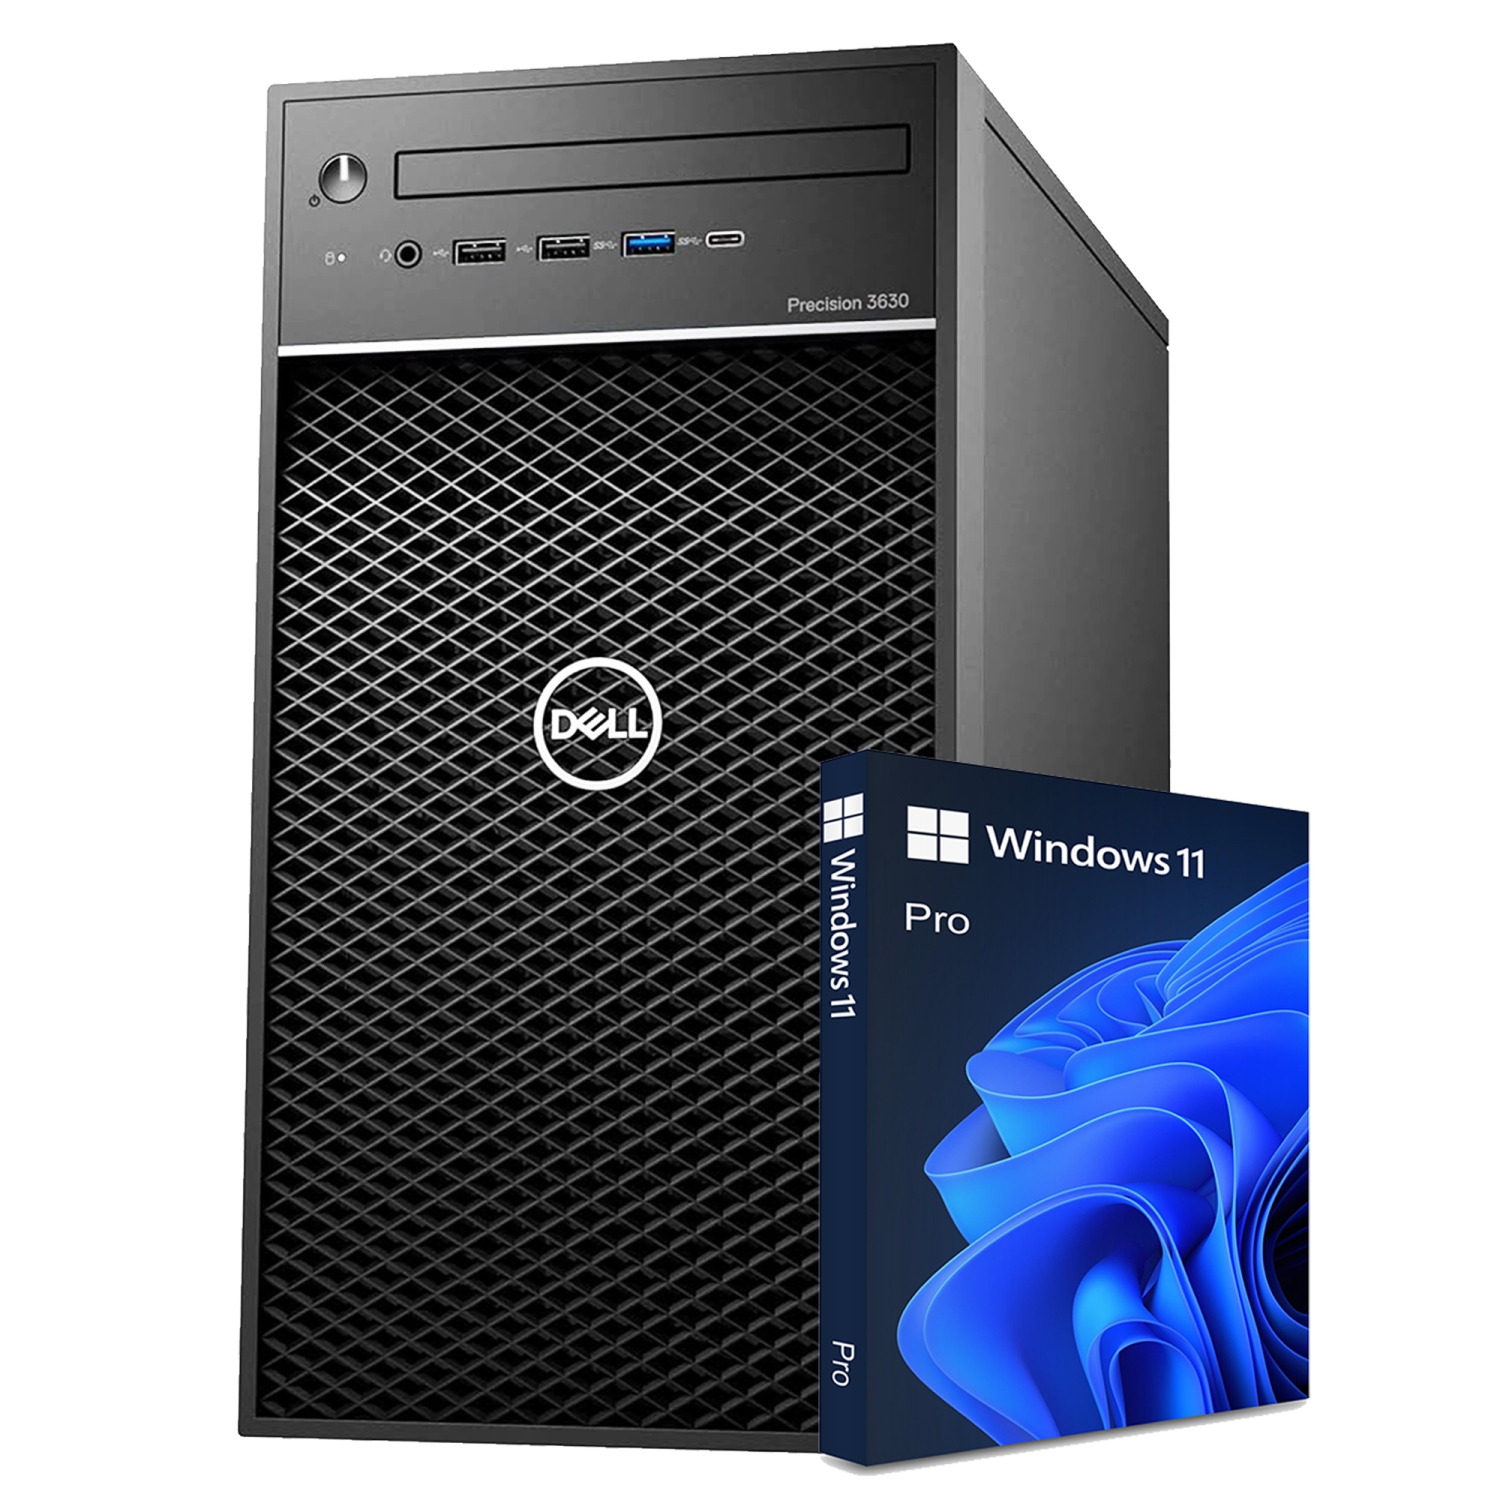 Refurbished (Good) - Dell Precision 3630 Tower Desktop Computer PC, Windows 11 Pro, Intel Core i5 8th Gen up to 4.10 GHz, 16GB DDR4 RAM, 256GB SSD, RGB Keyboard and Mouse, WIFI